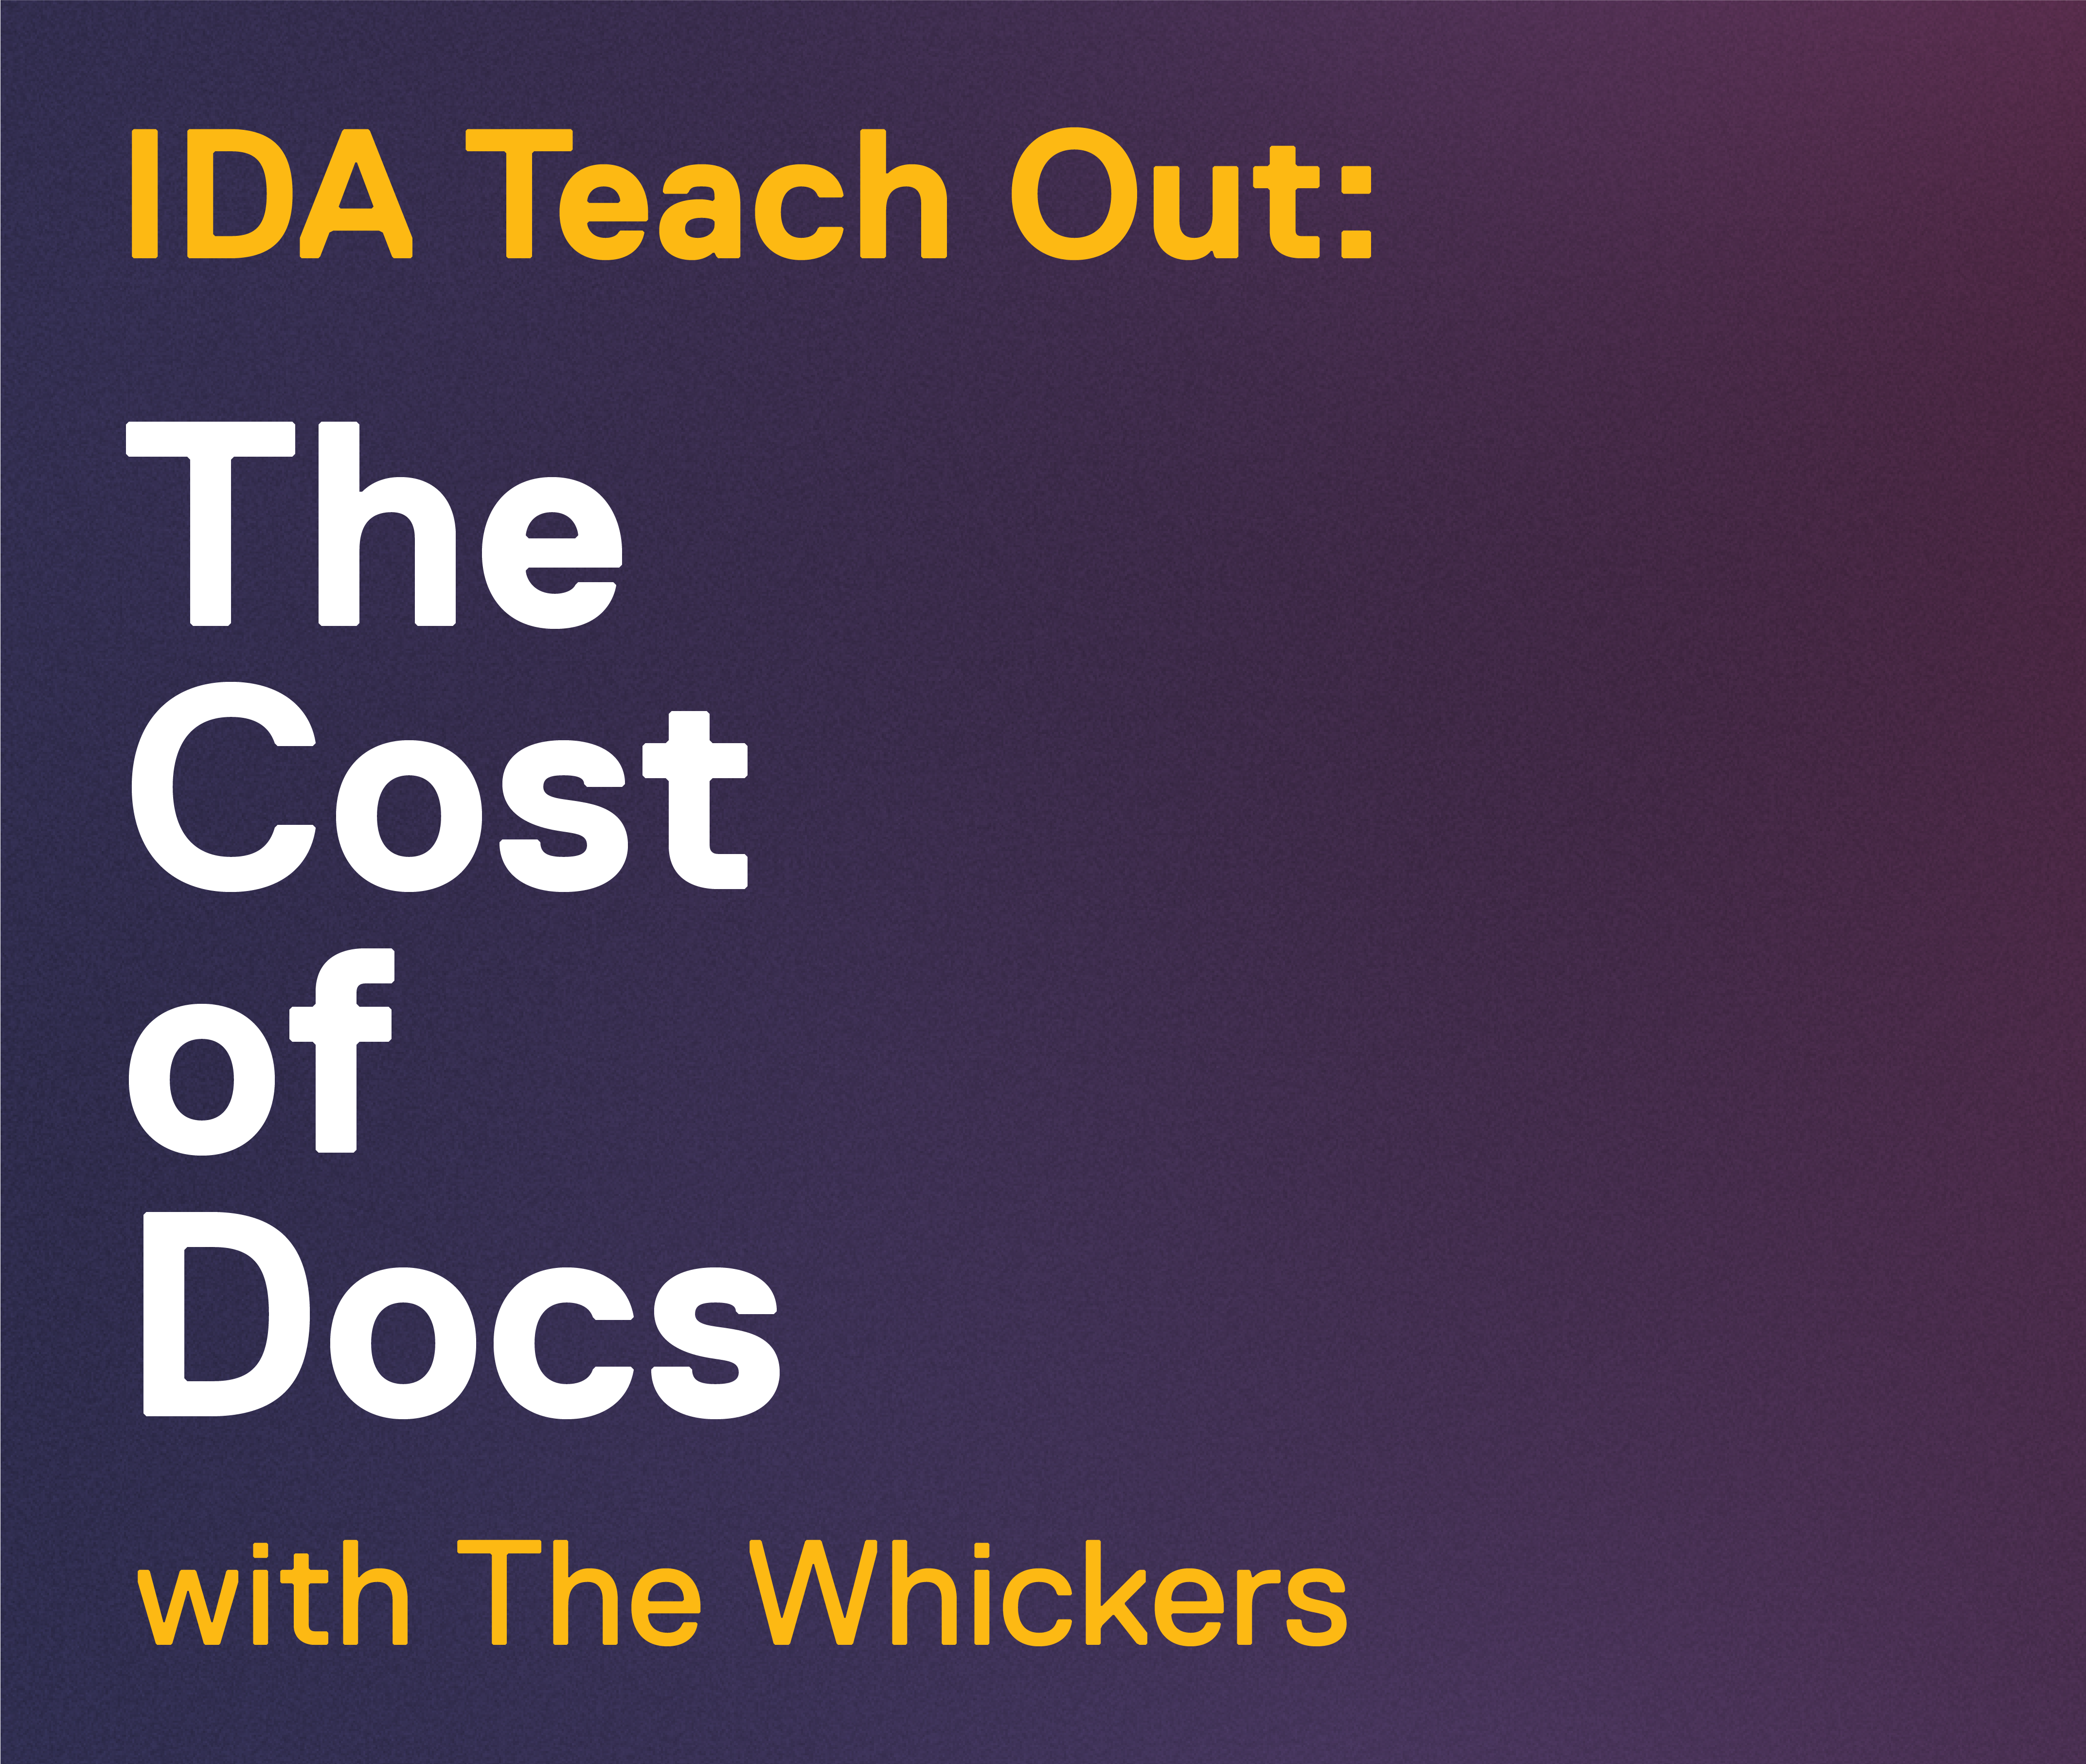 IDA Teach Out: The Cost of Docs with The Whickers